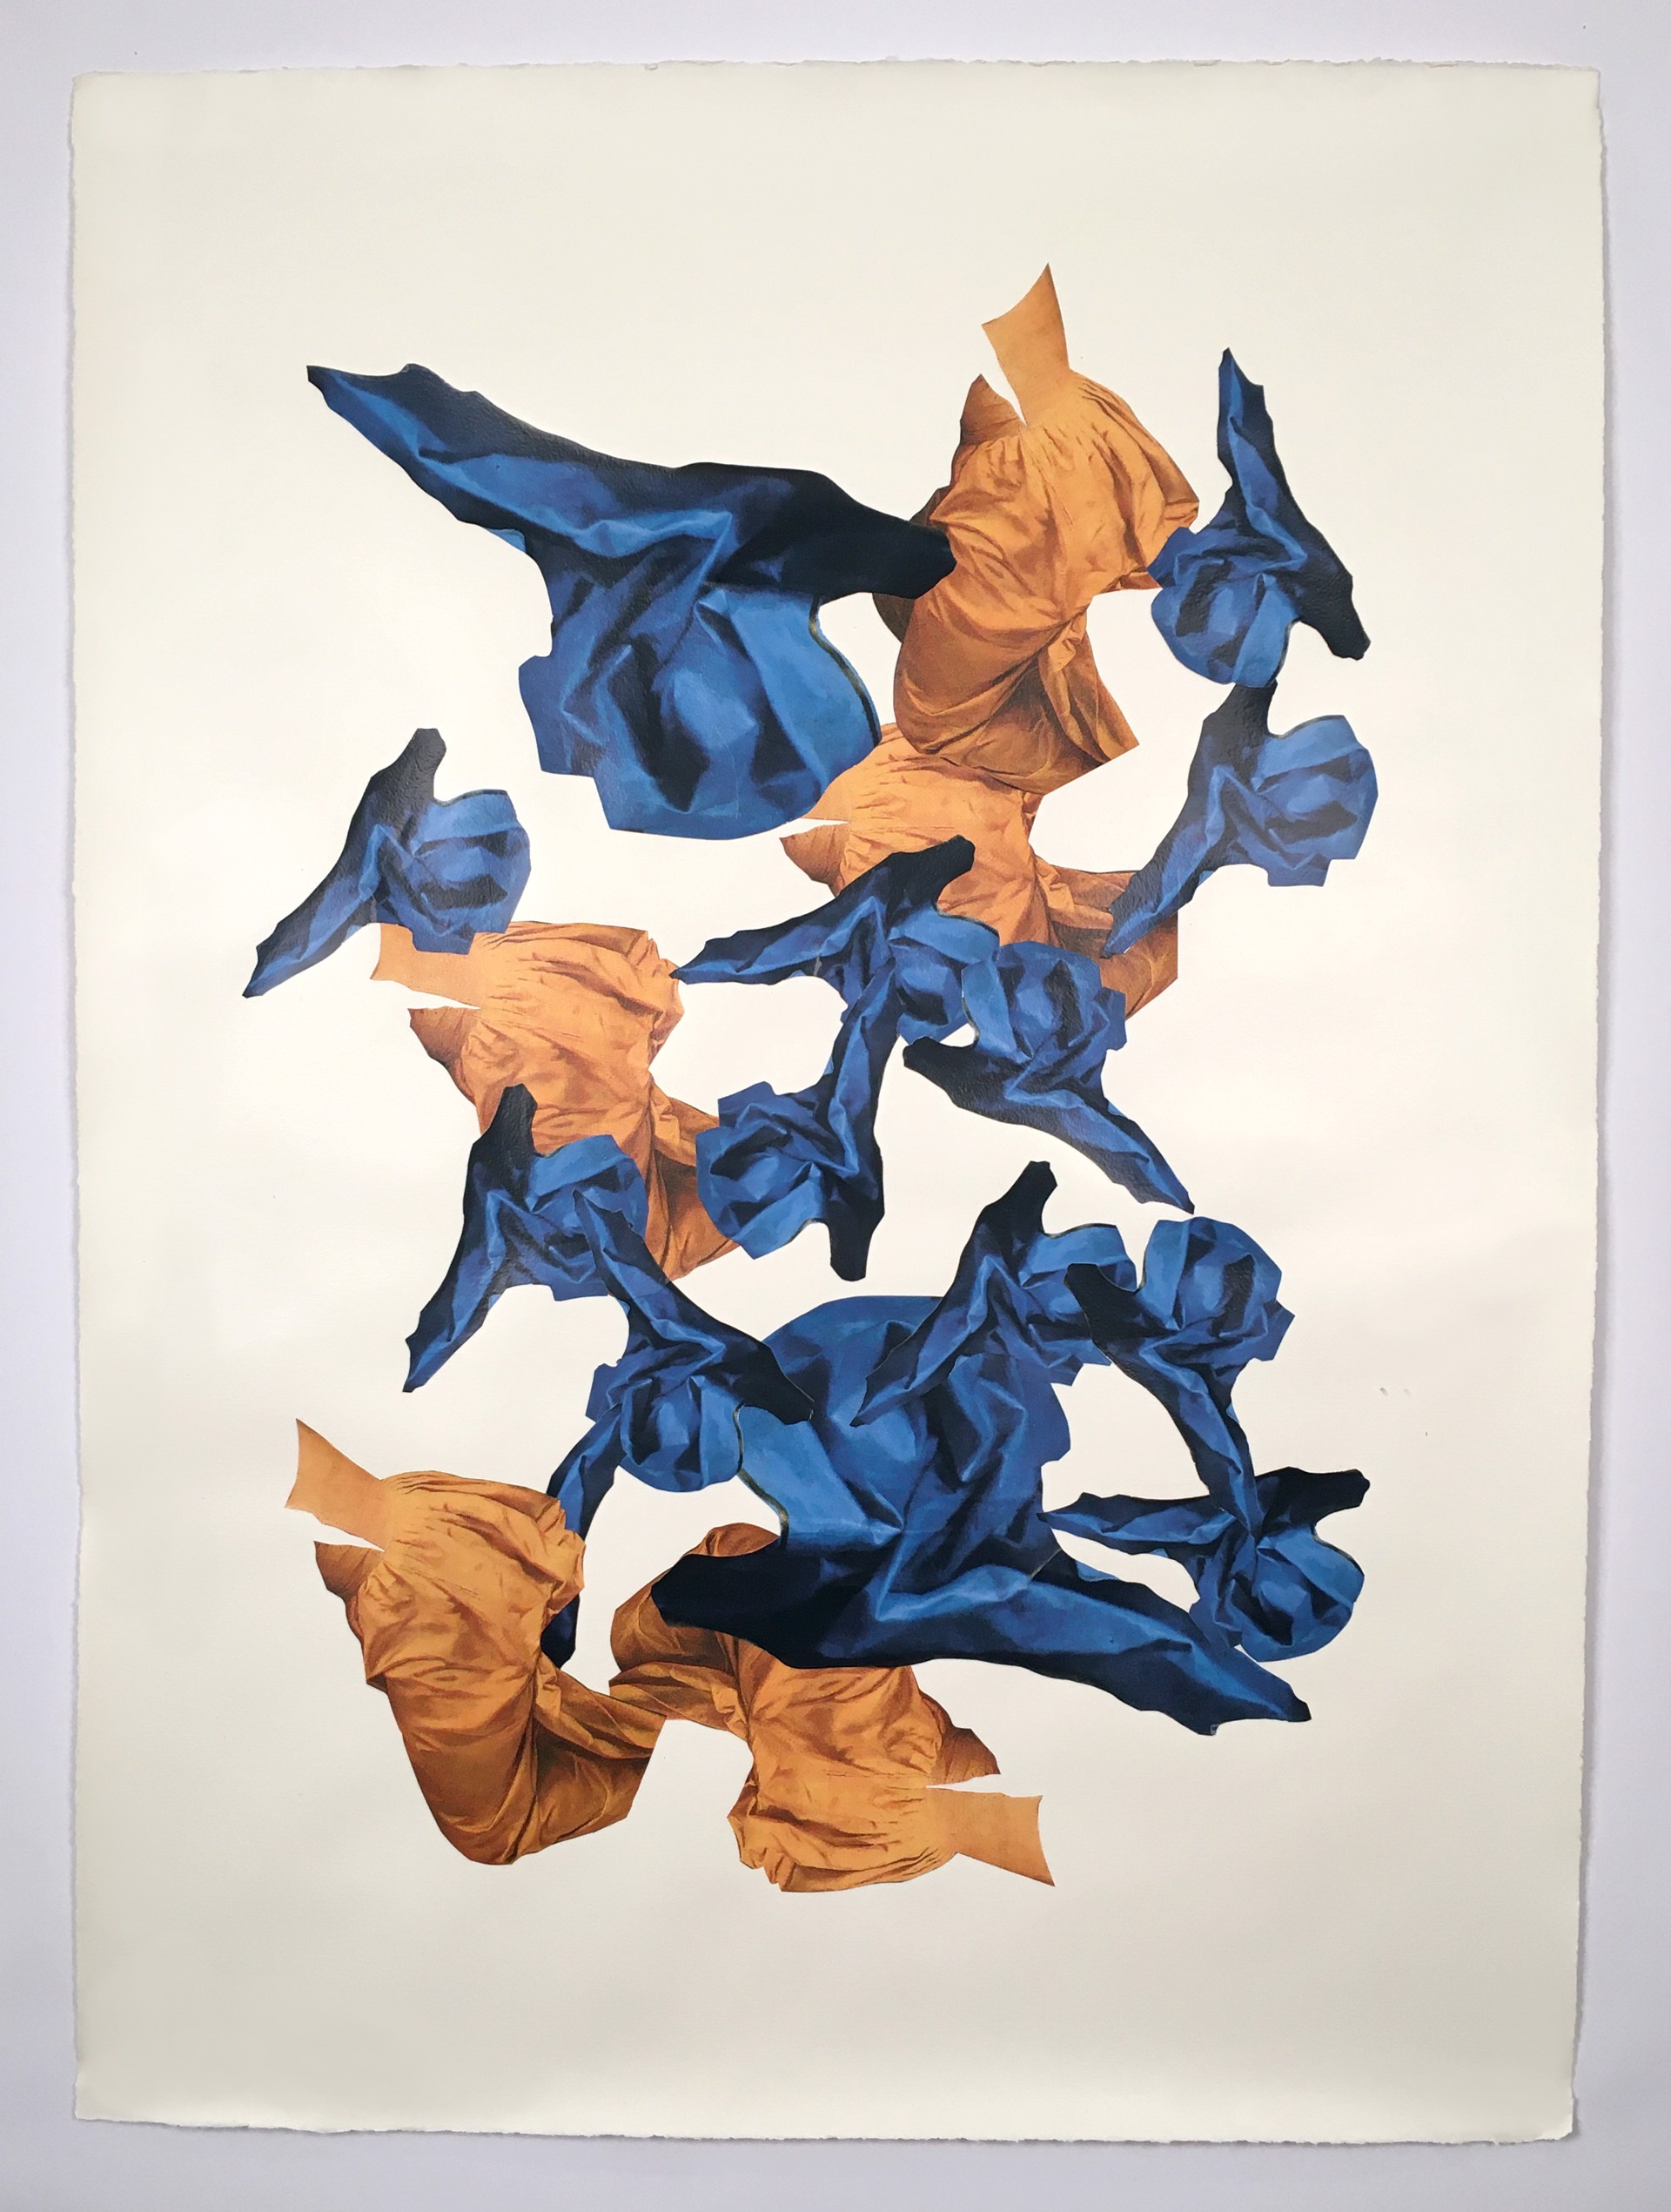 Untitled (blue and orange) by Ray Beldner